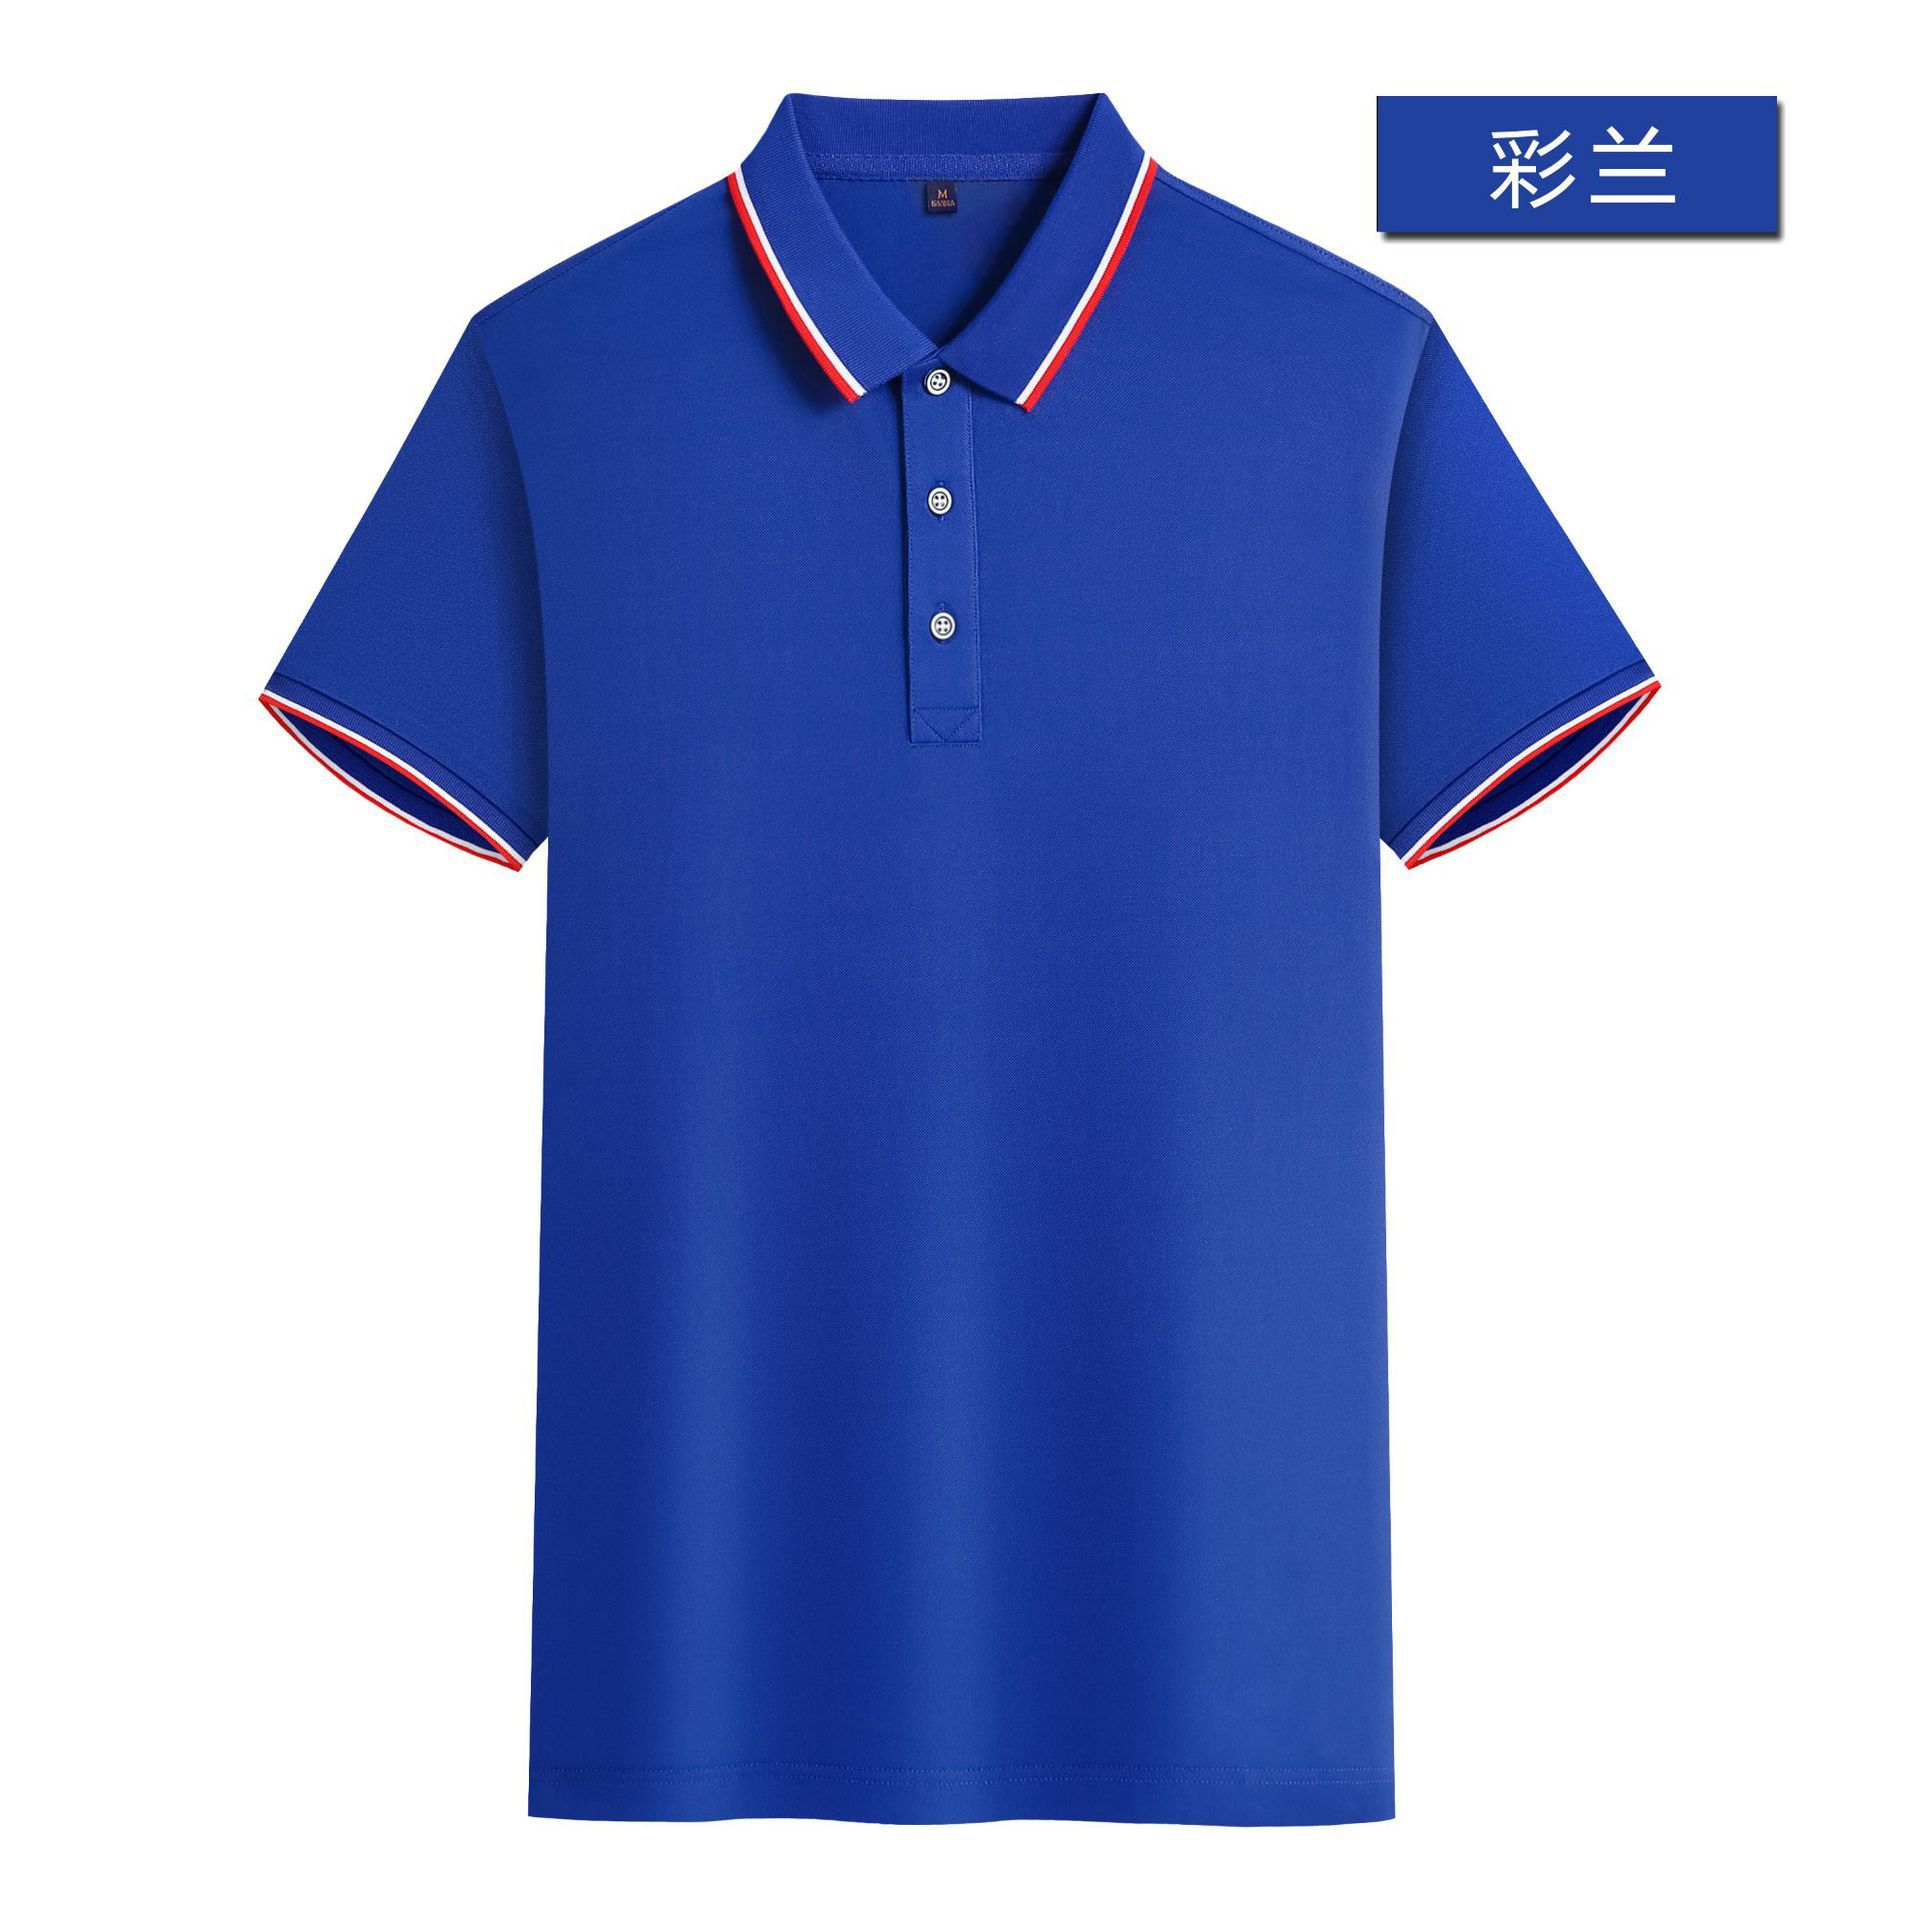 Work Clothes Customized Printed Lapel Polo Shirt Enterprise Work Wear Short-Sleeved T-shirt Team Advertising Shirt Printed Embroidered Logo